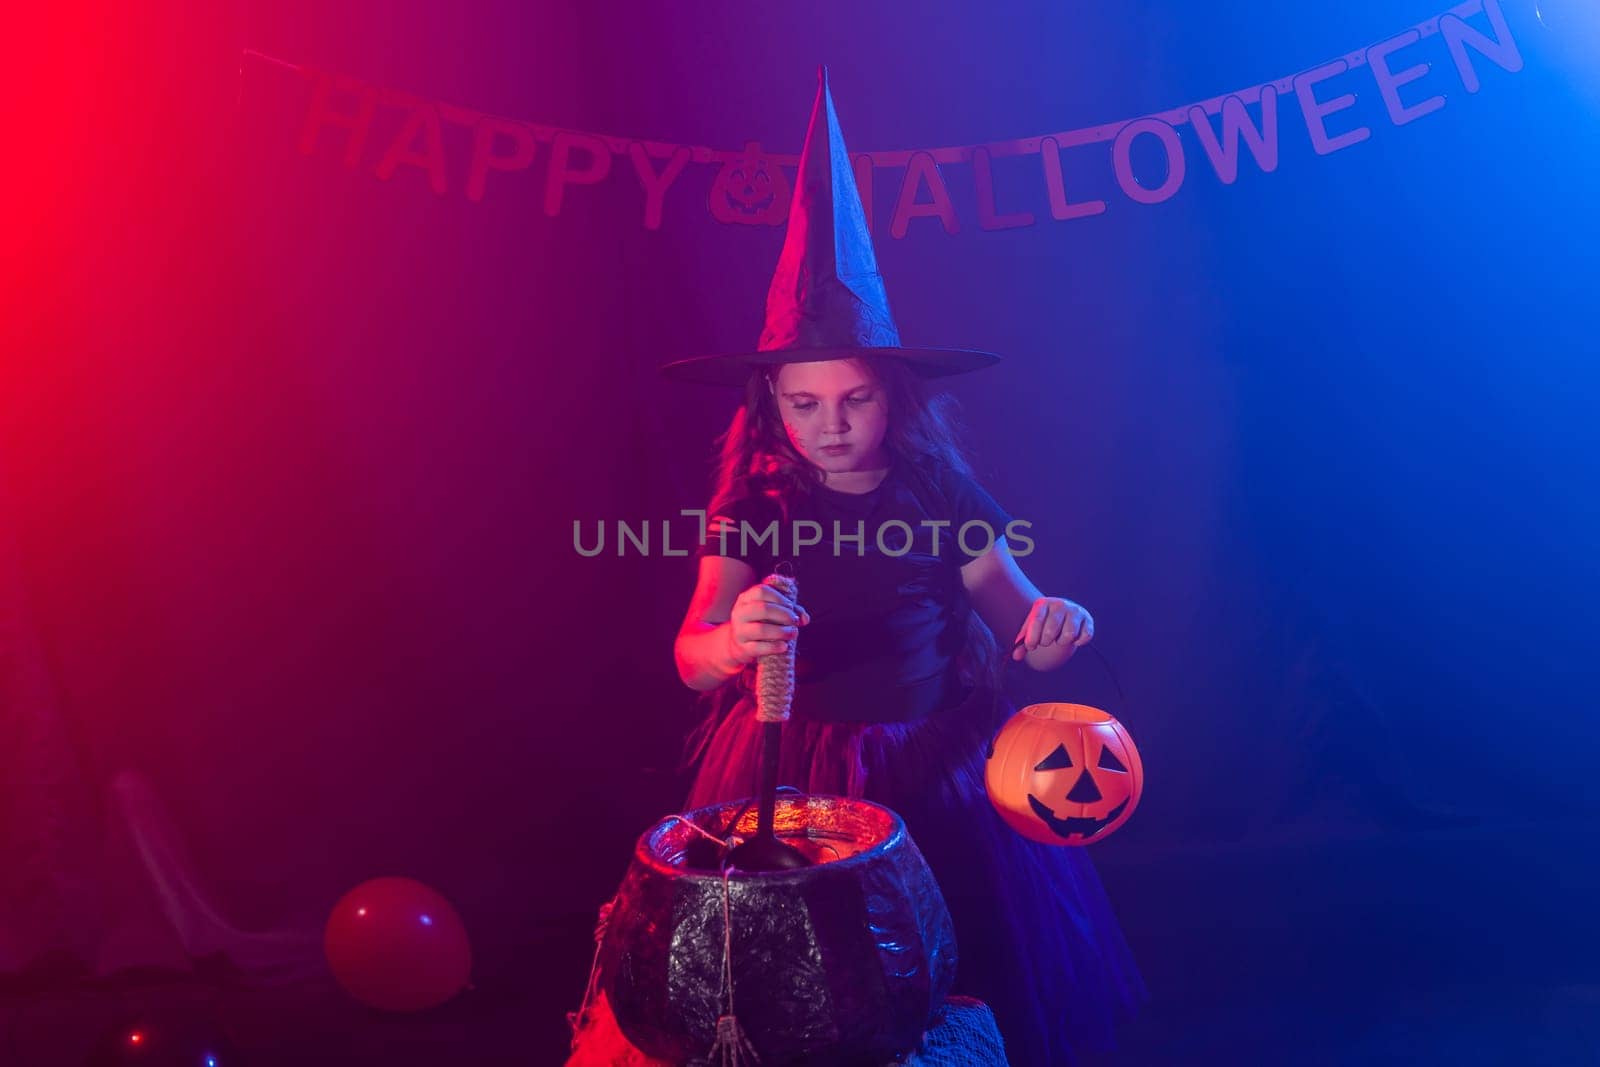 Little witch child cooking potion in the cauldron on Halloween